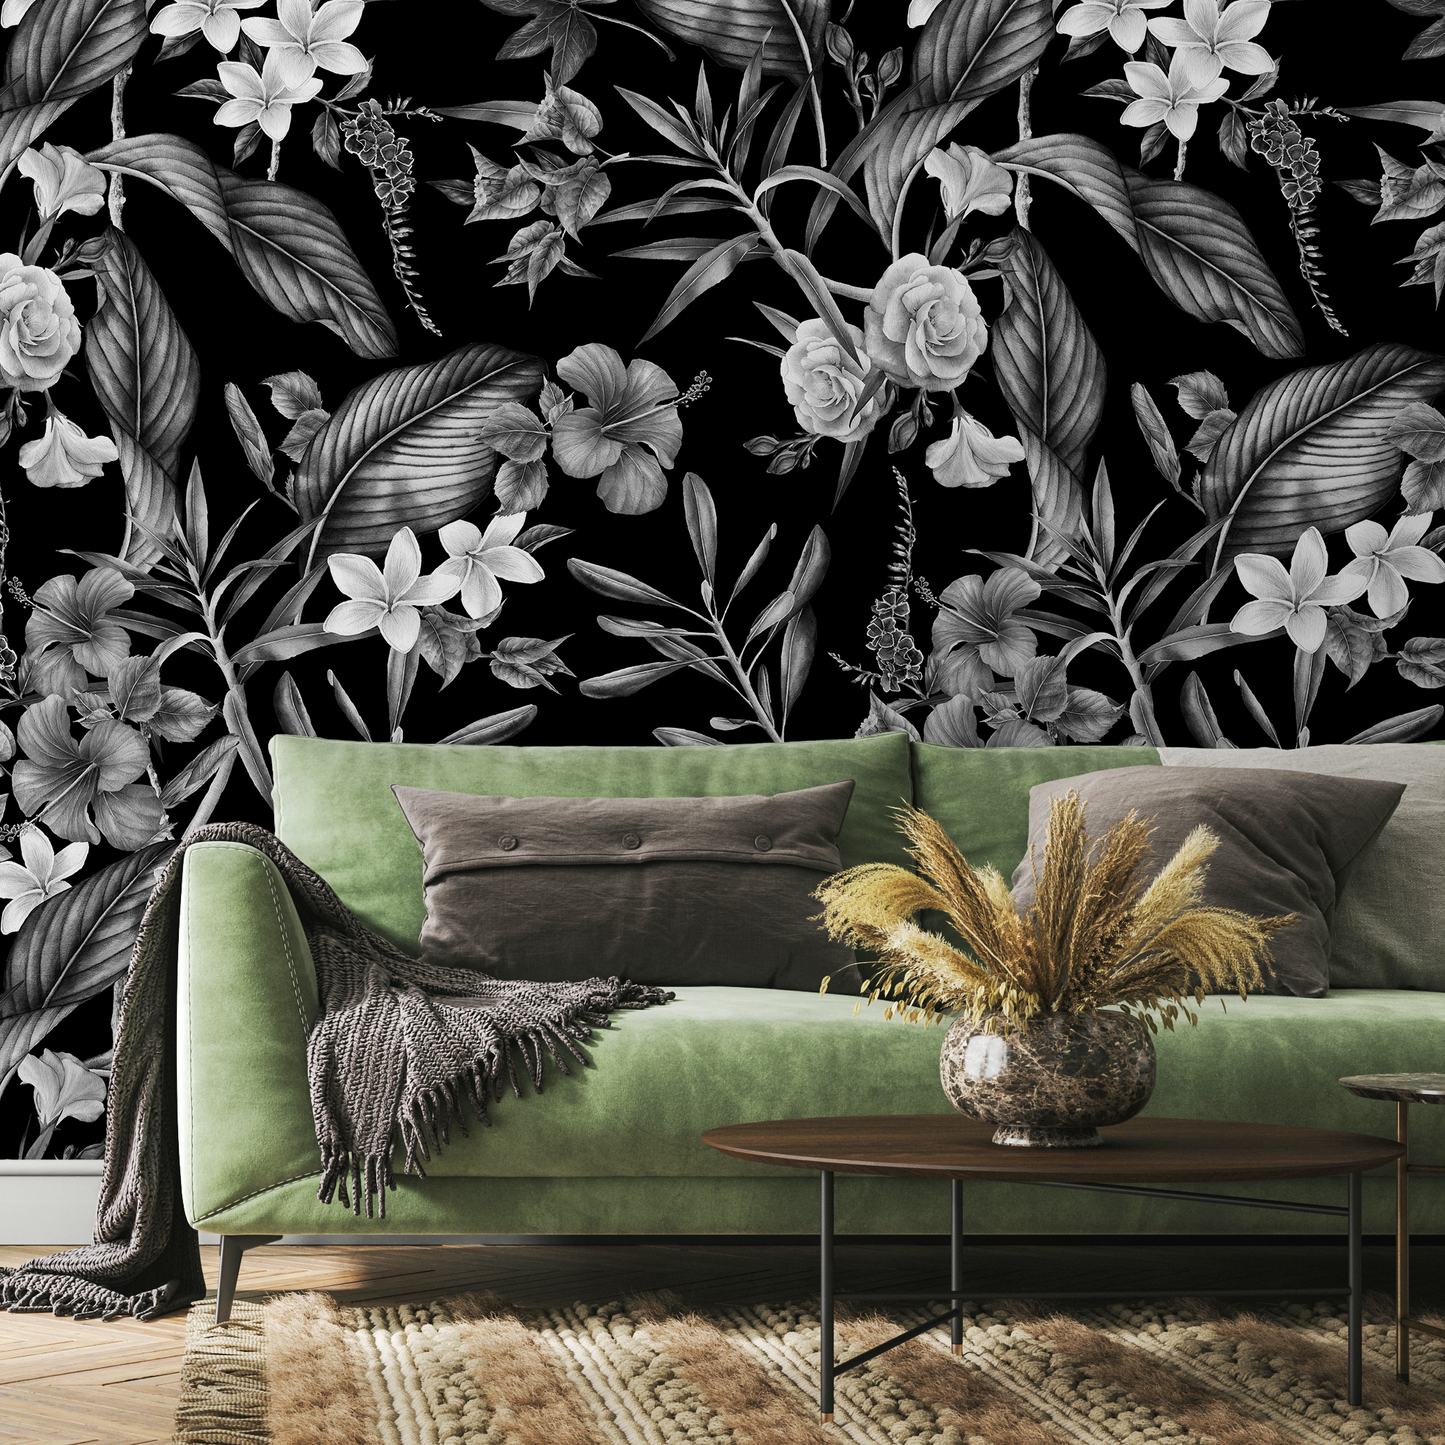 Dark Floral Botanical Wallpaper Vintage Wallpaper Peel and Stick and Traditional Wallpaper - A382